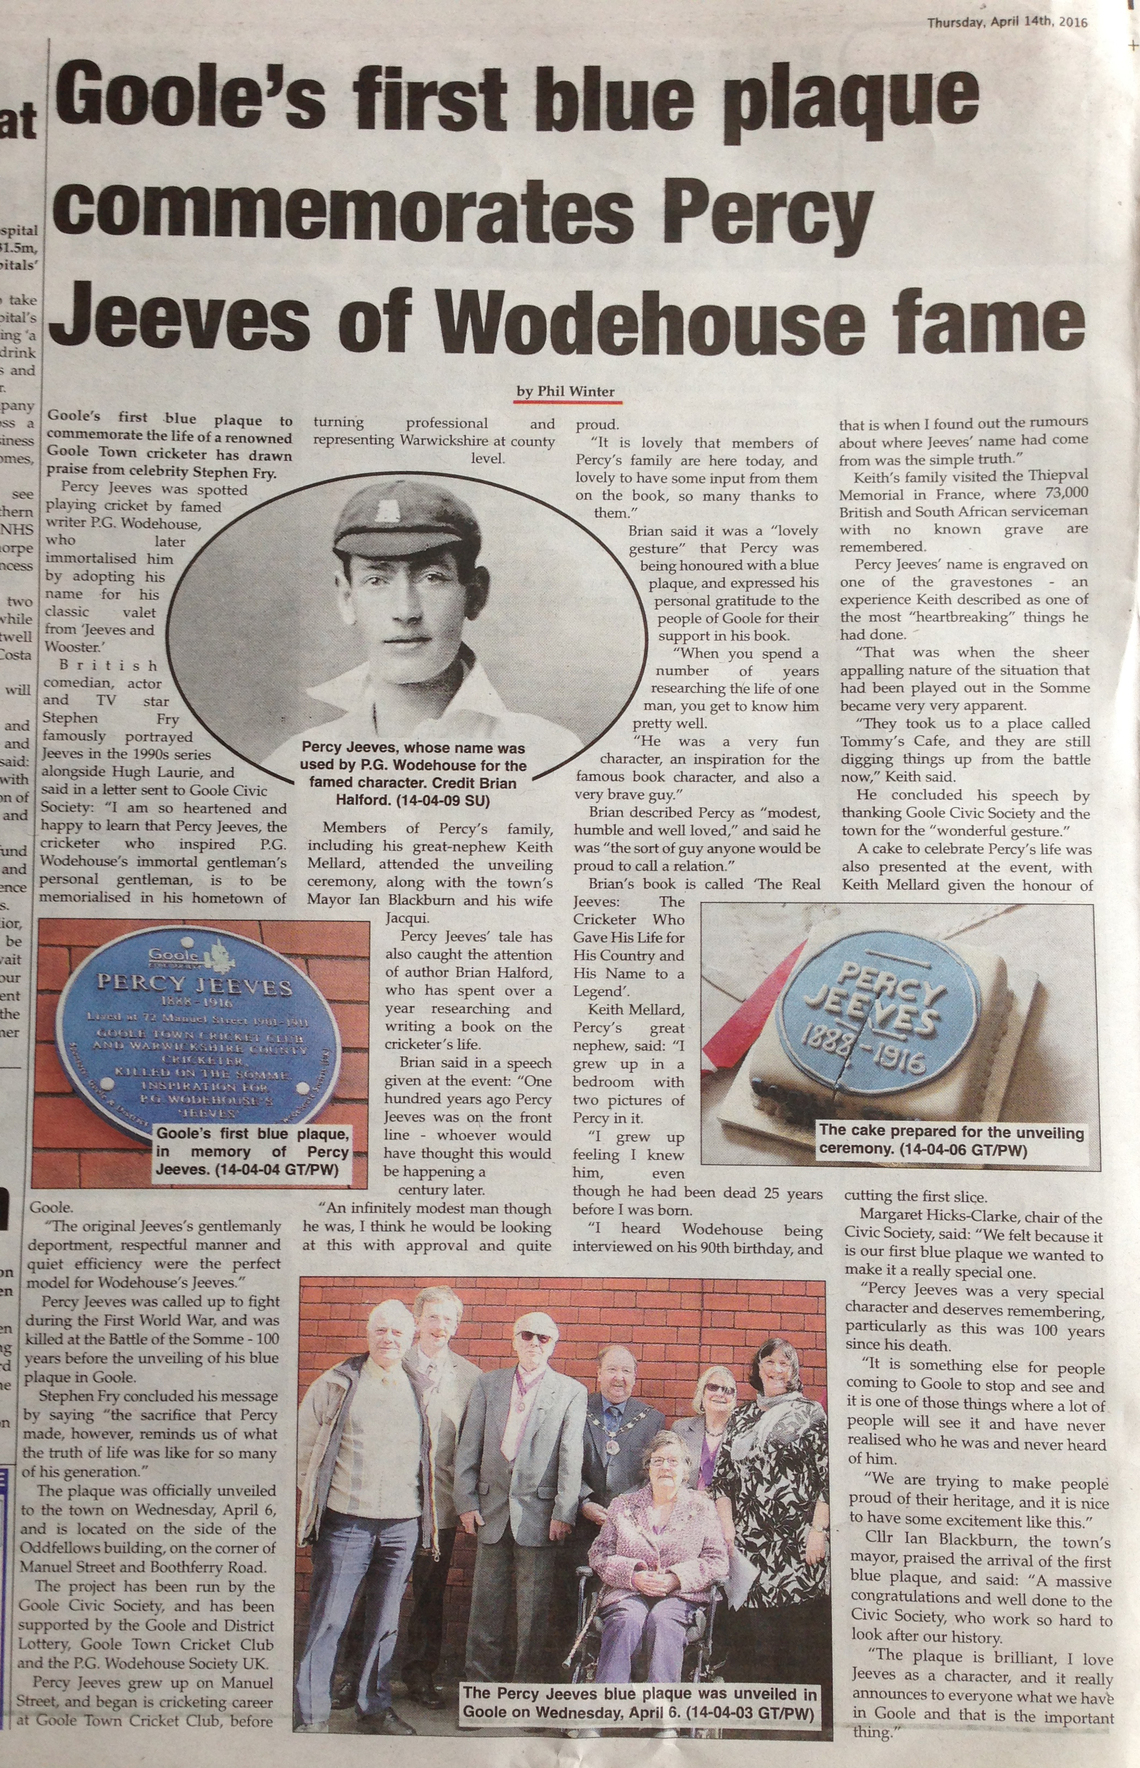 Goole Times coverage of Jeeves Blue Plaque unveiling